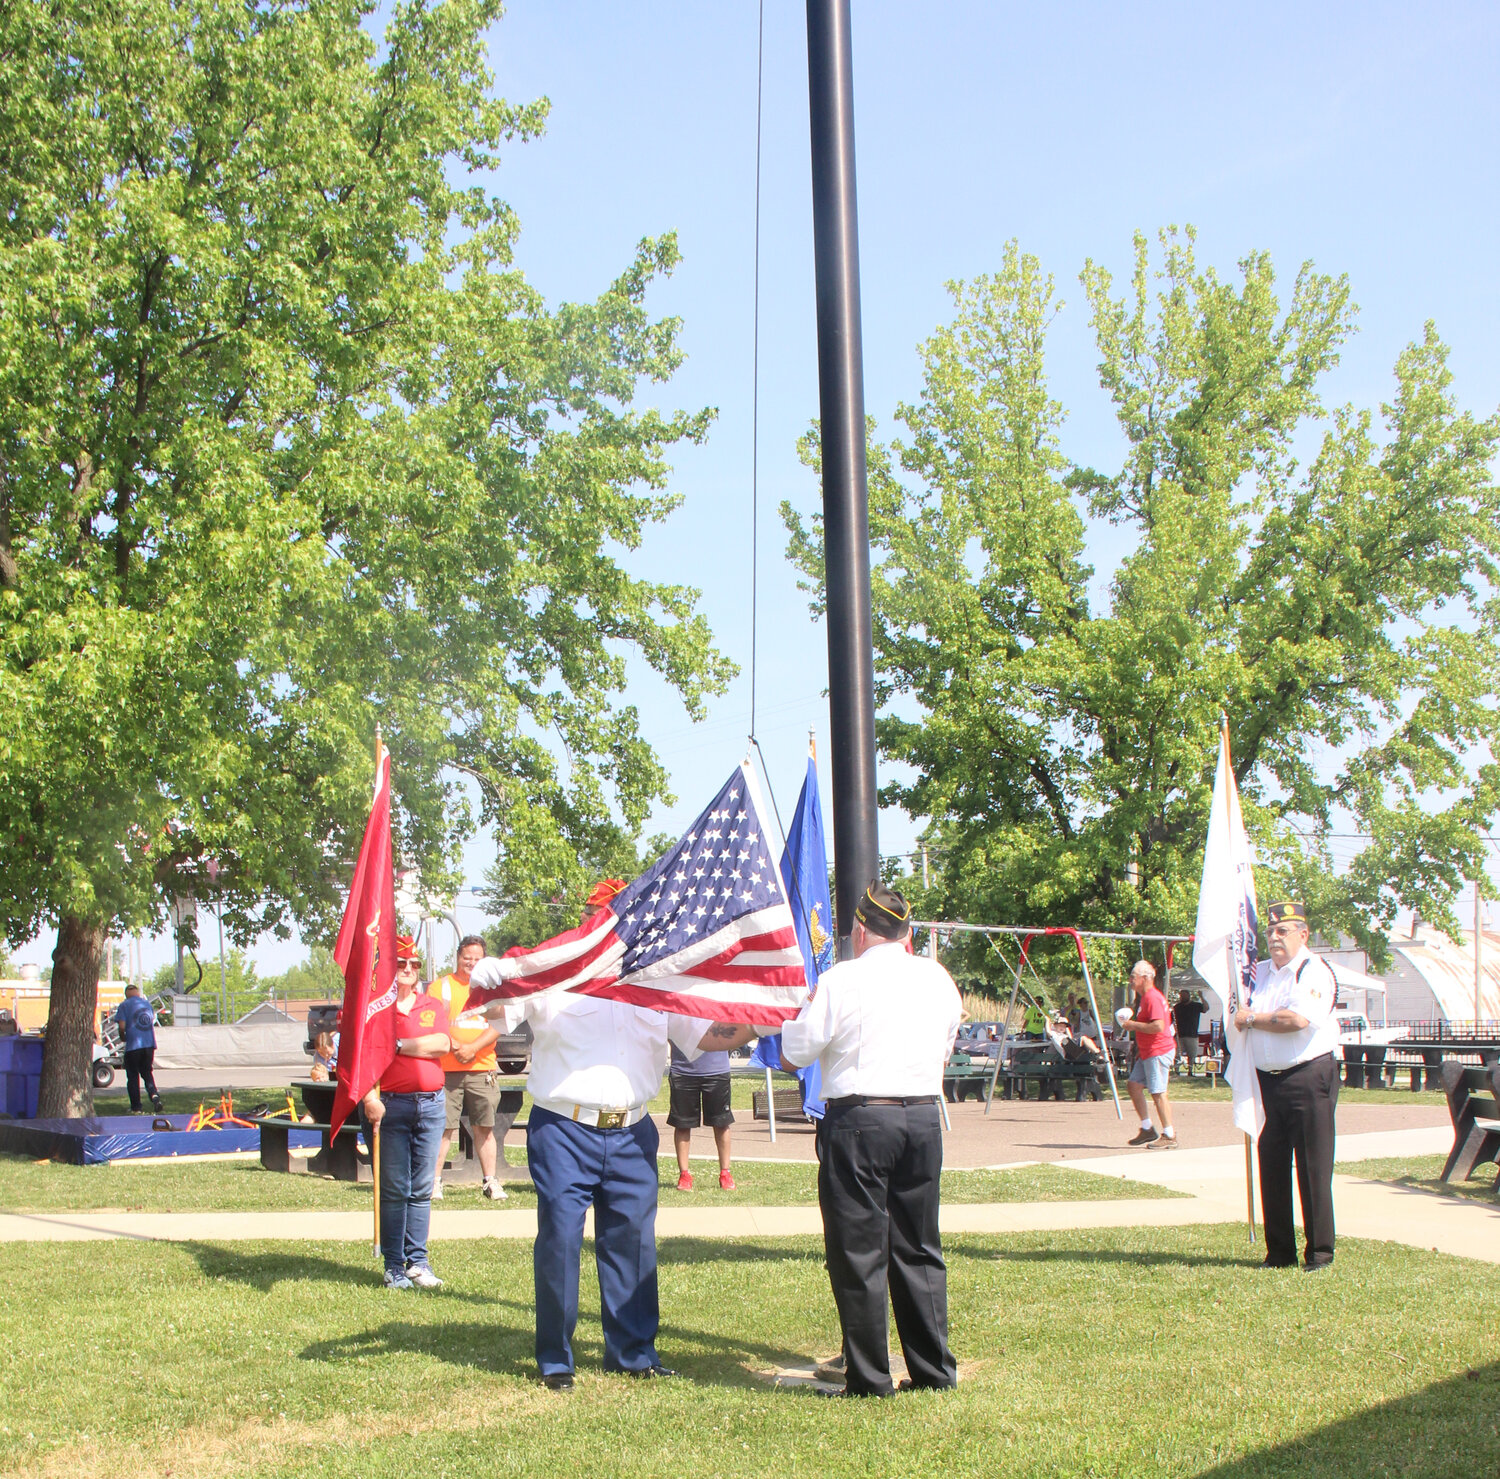 Rick Mantione, right, hoists the U.S. flag while Mike Buquet, the commandant to the honor guard, salutes.